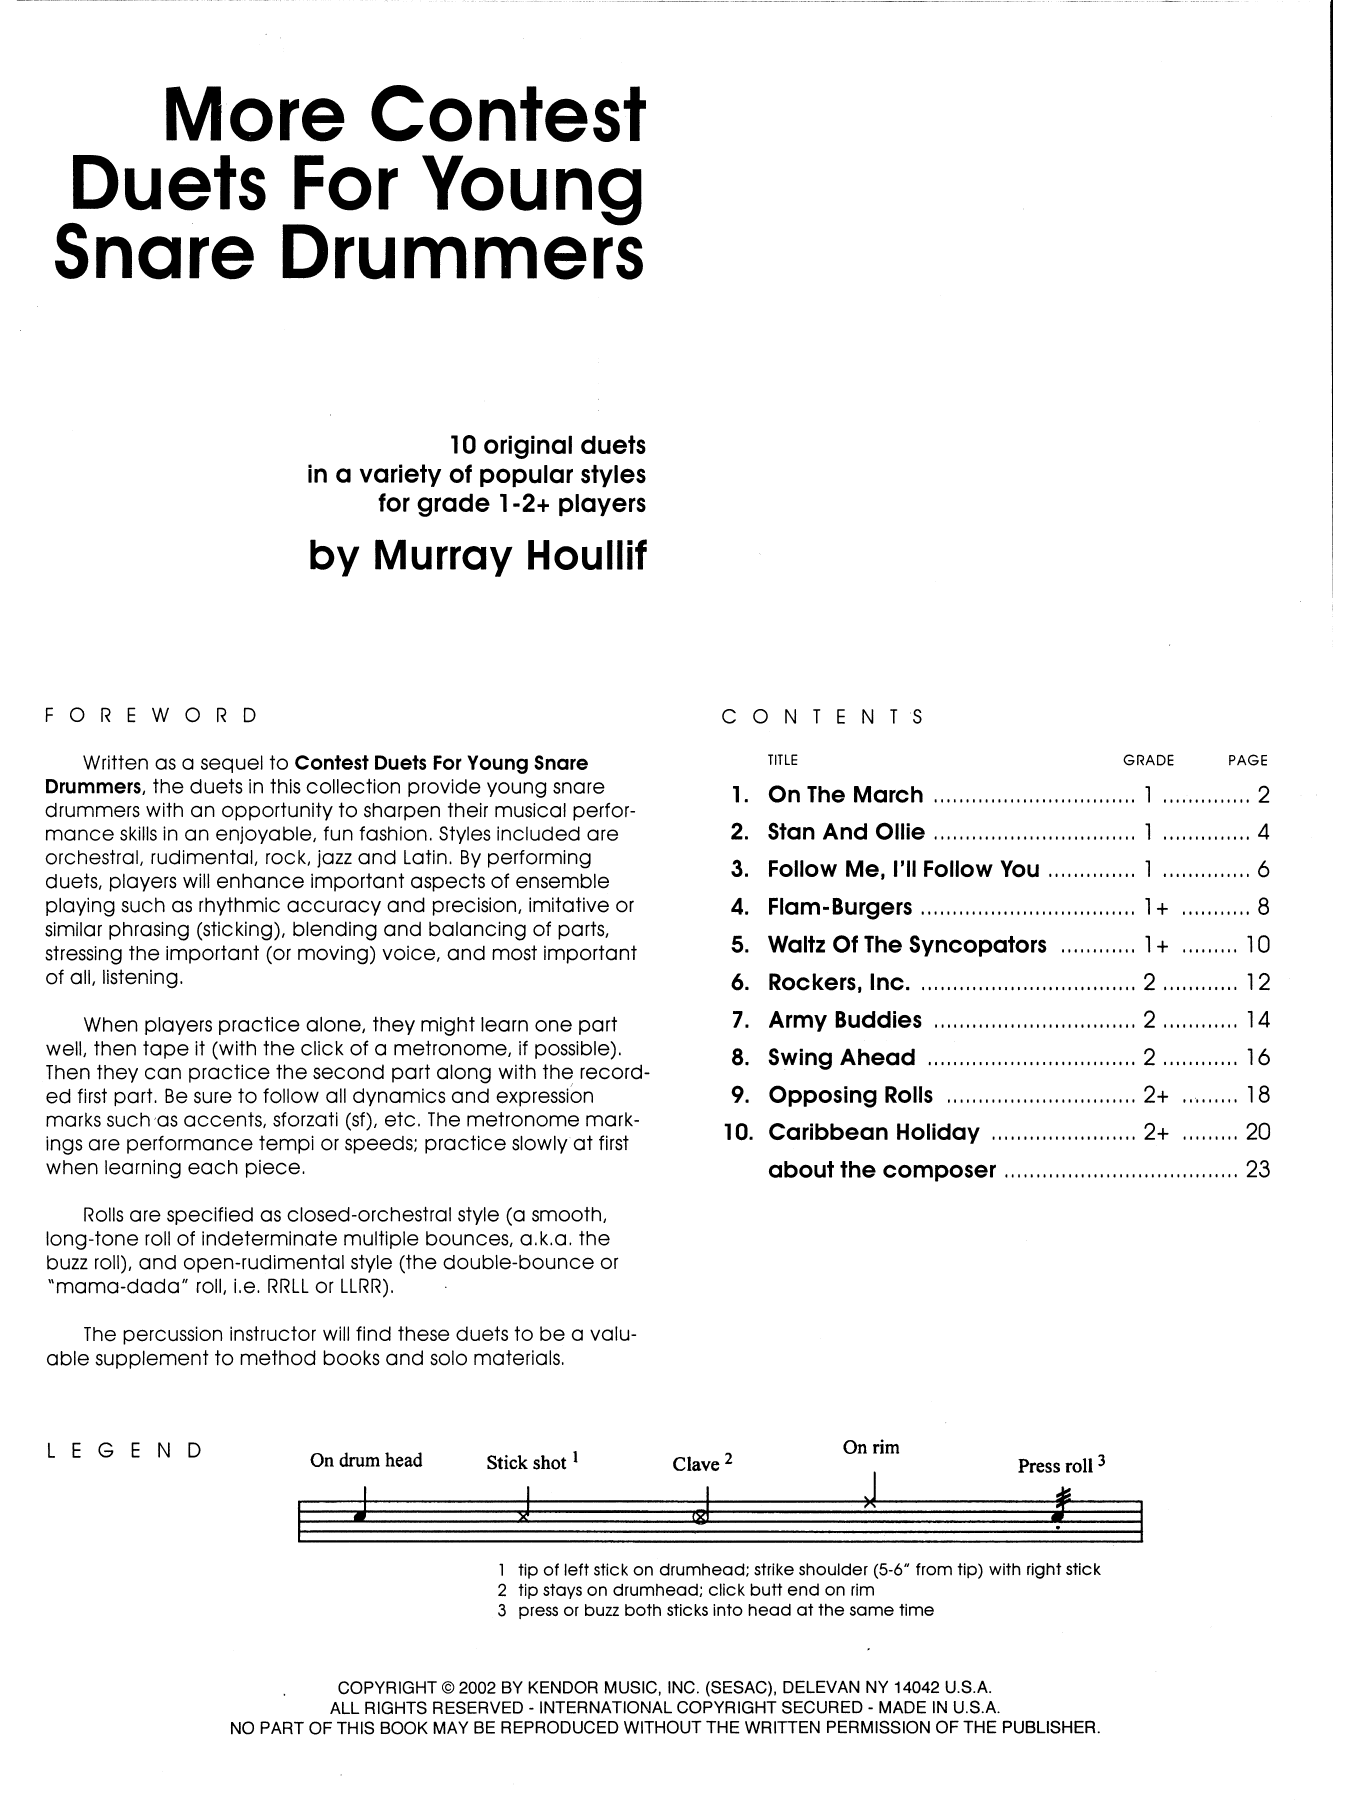 More Contest Duets For Young Snare Drummers (Percussion Ensemble) von Murray Houllif